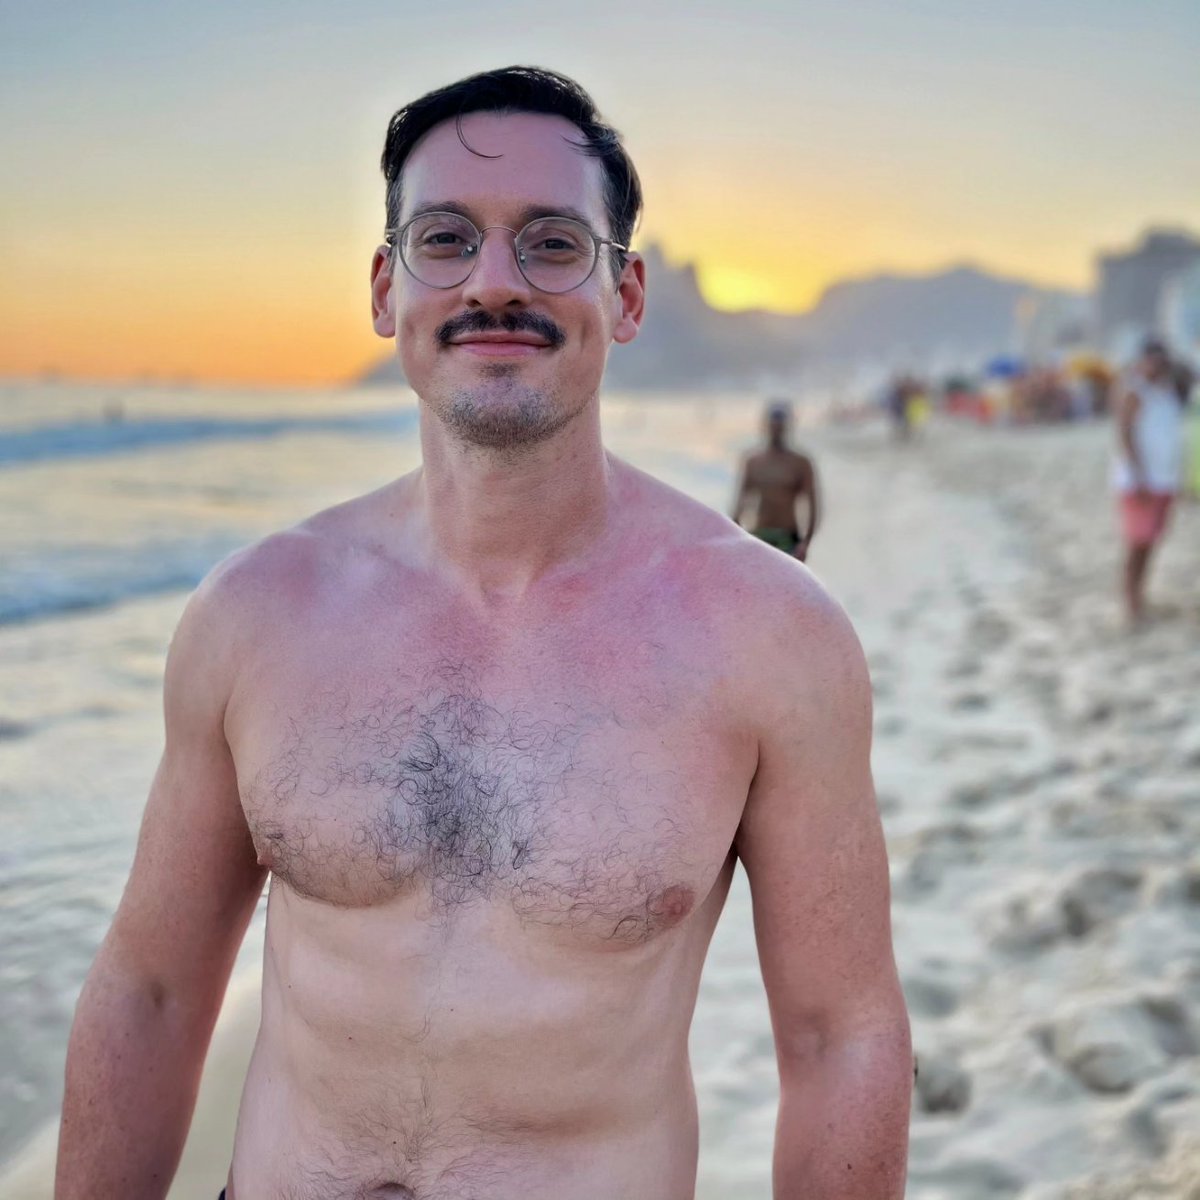 If you went to Ipanema beach at sunset and didn't pressgang your boyfriend into taking thirsty photos for you did you even go to Ipanema beach?